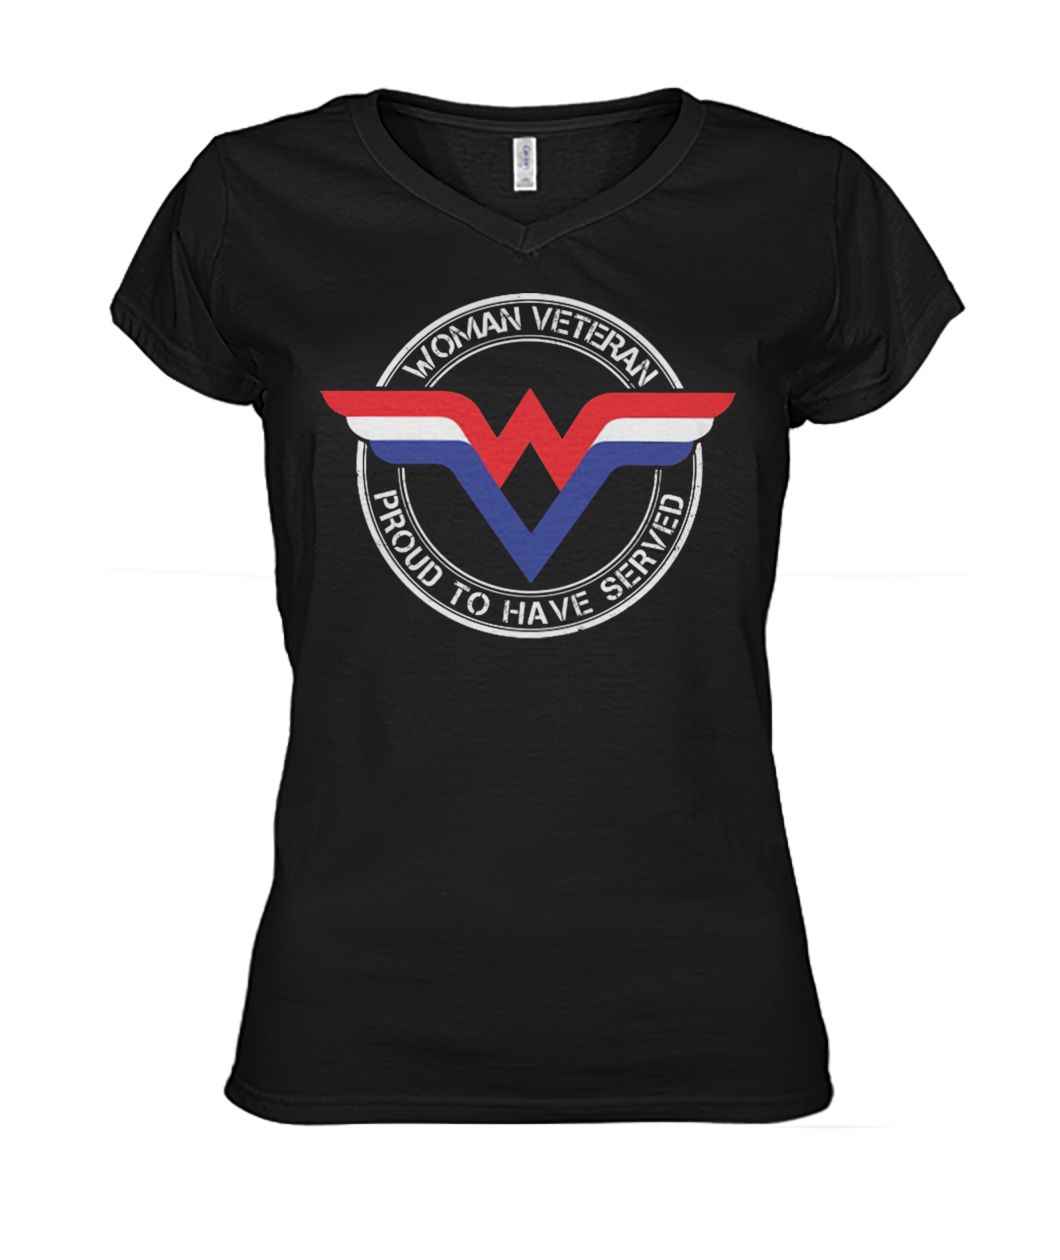 Woman veteran proud to have served wonder woman women's v-neck